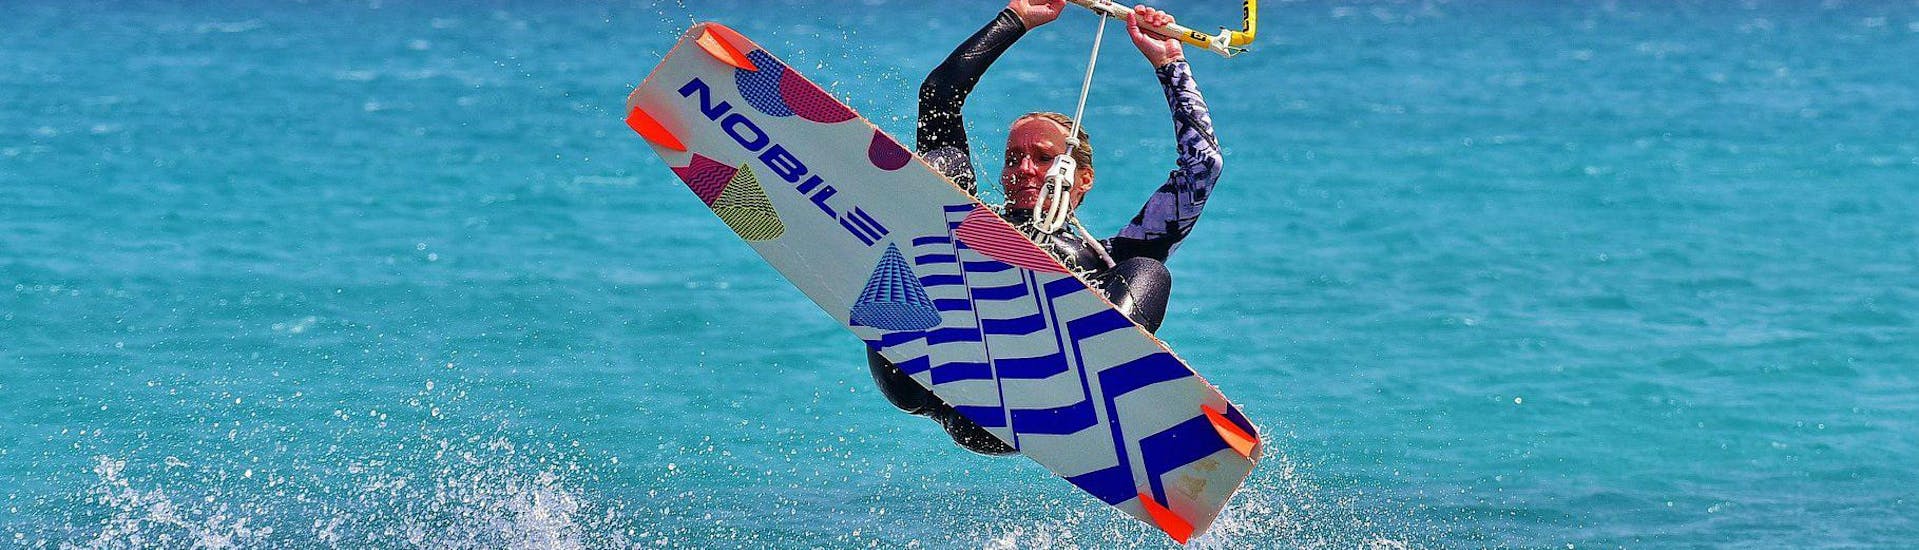 Private Kitesurfing Lessons for Teens &amp; Adults - All Levels with Matas Bay Surf School - Hero image